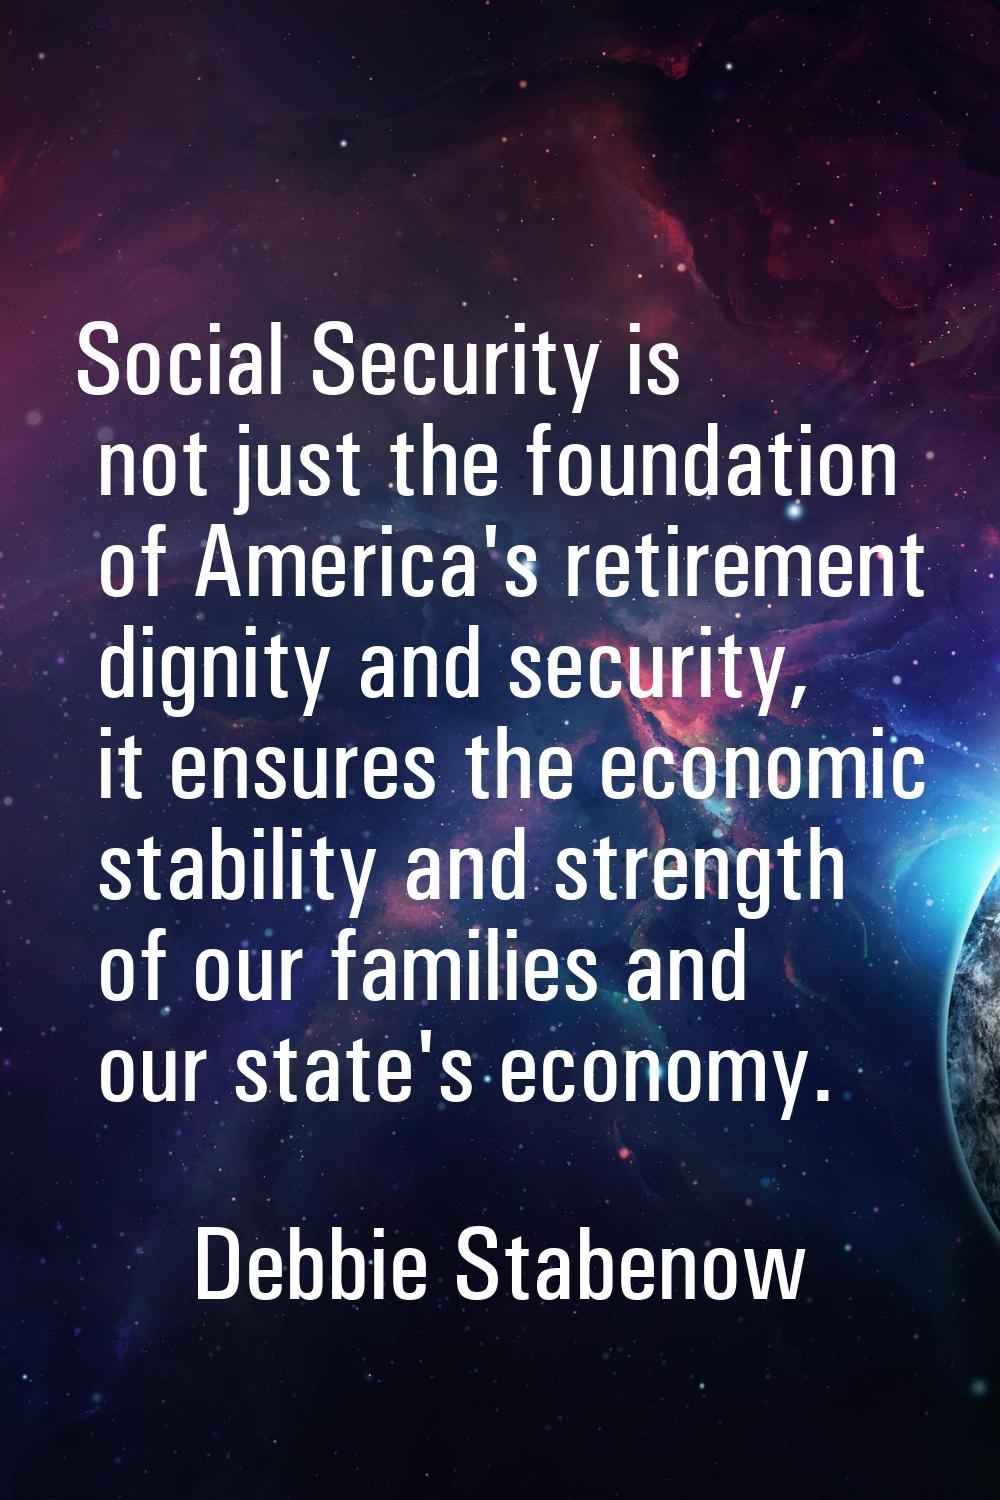 Social Security is not just the foundation of America's retirement dignity and security, it ensures